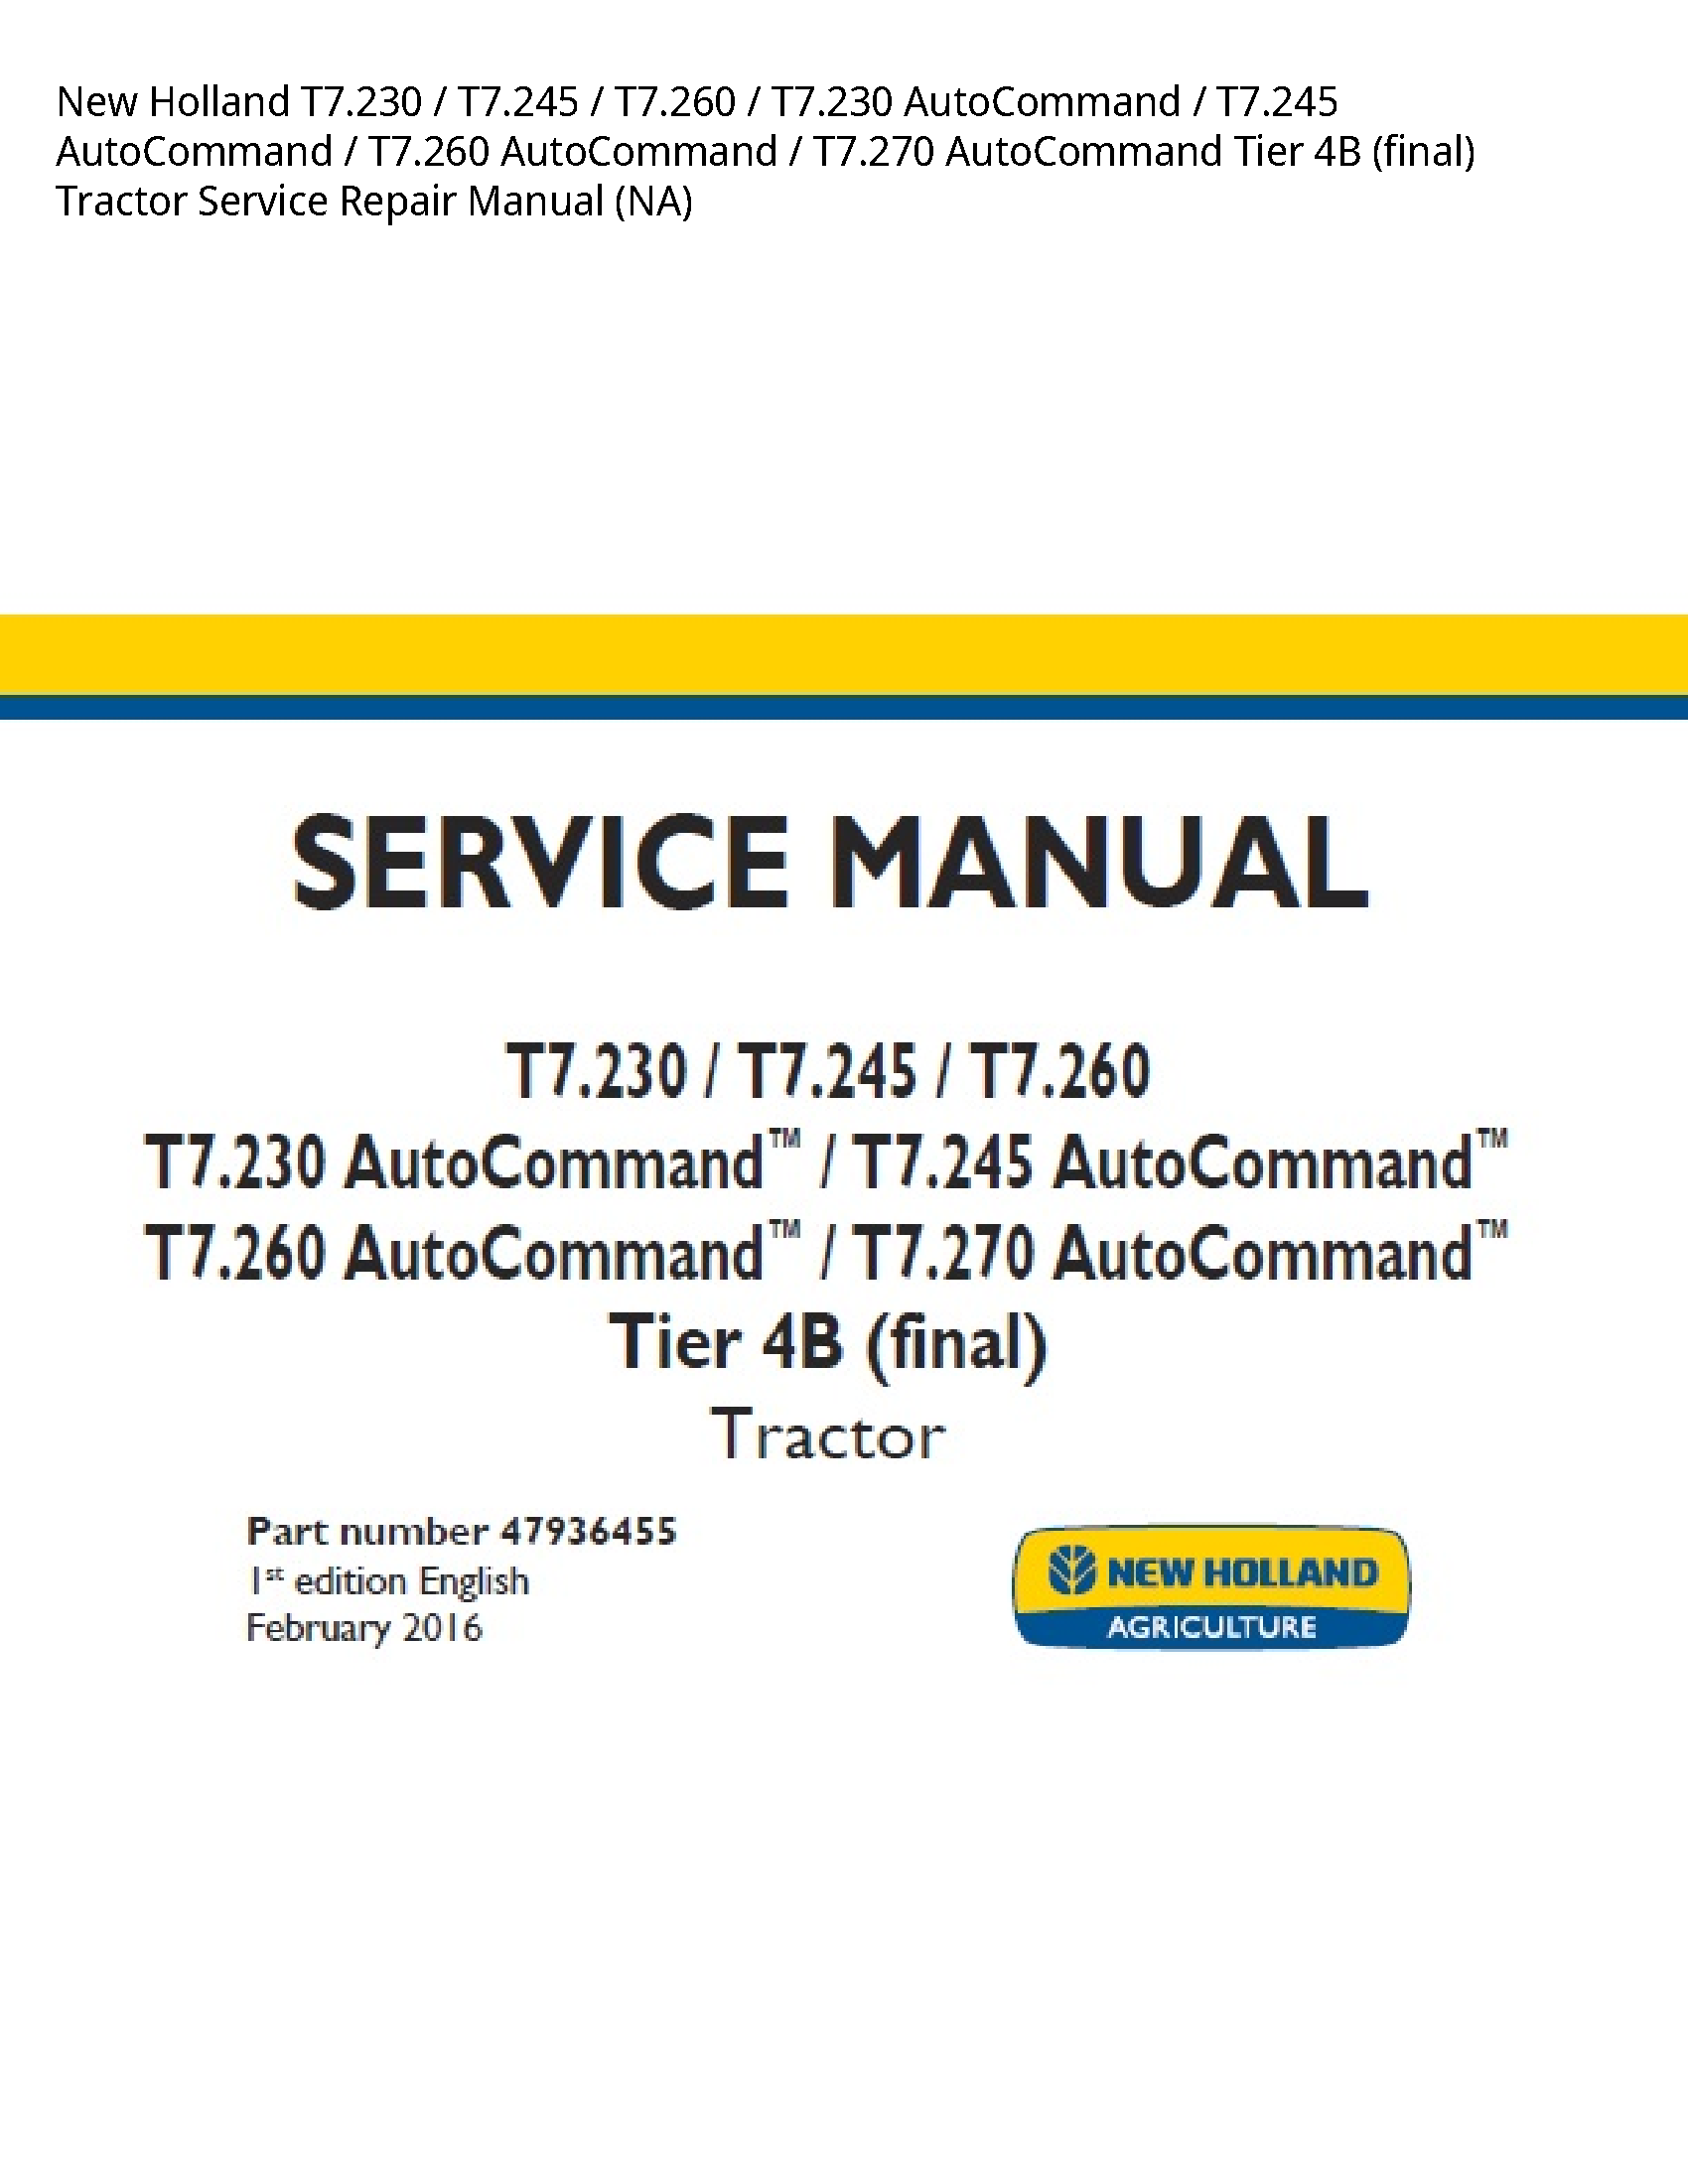 New Holland T7.230 AutoCommand AutoCommand AutoCommand AutoCommand Tier (final) Tractor manual